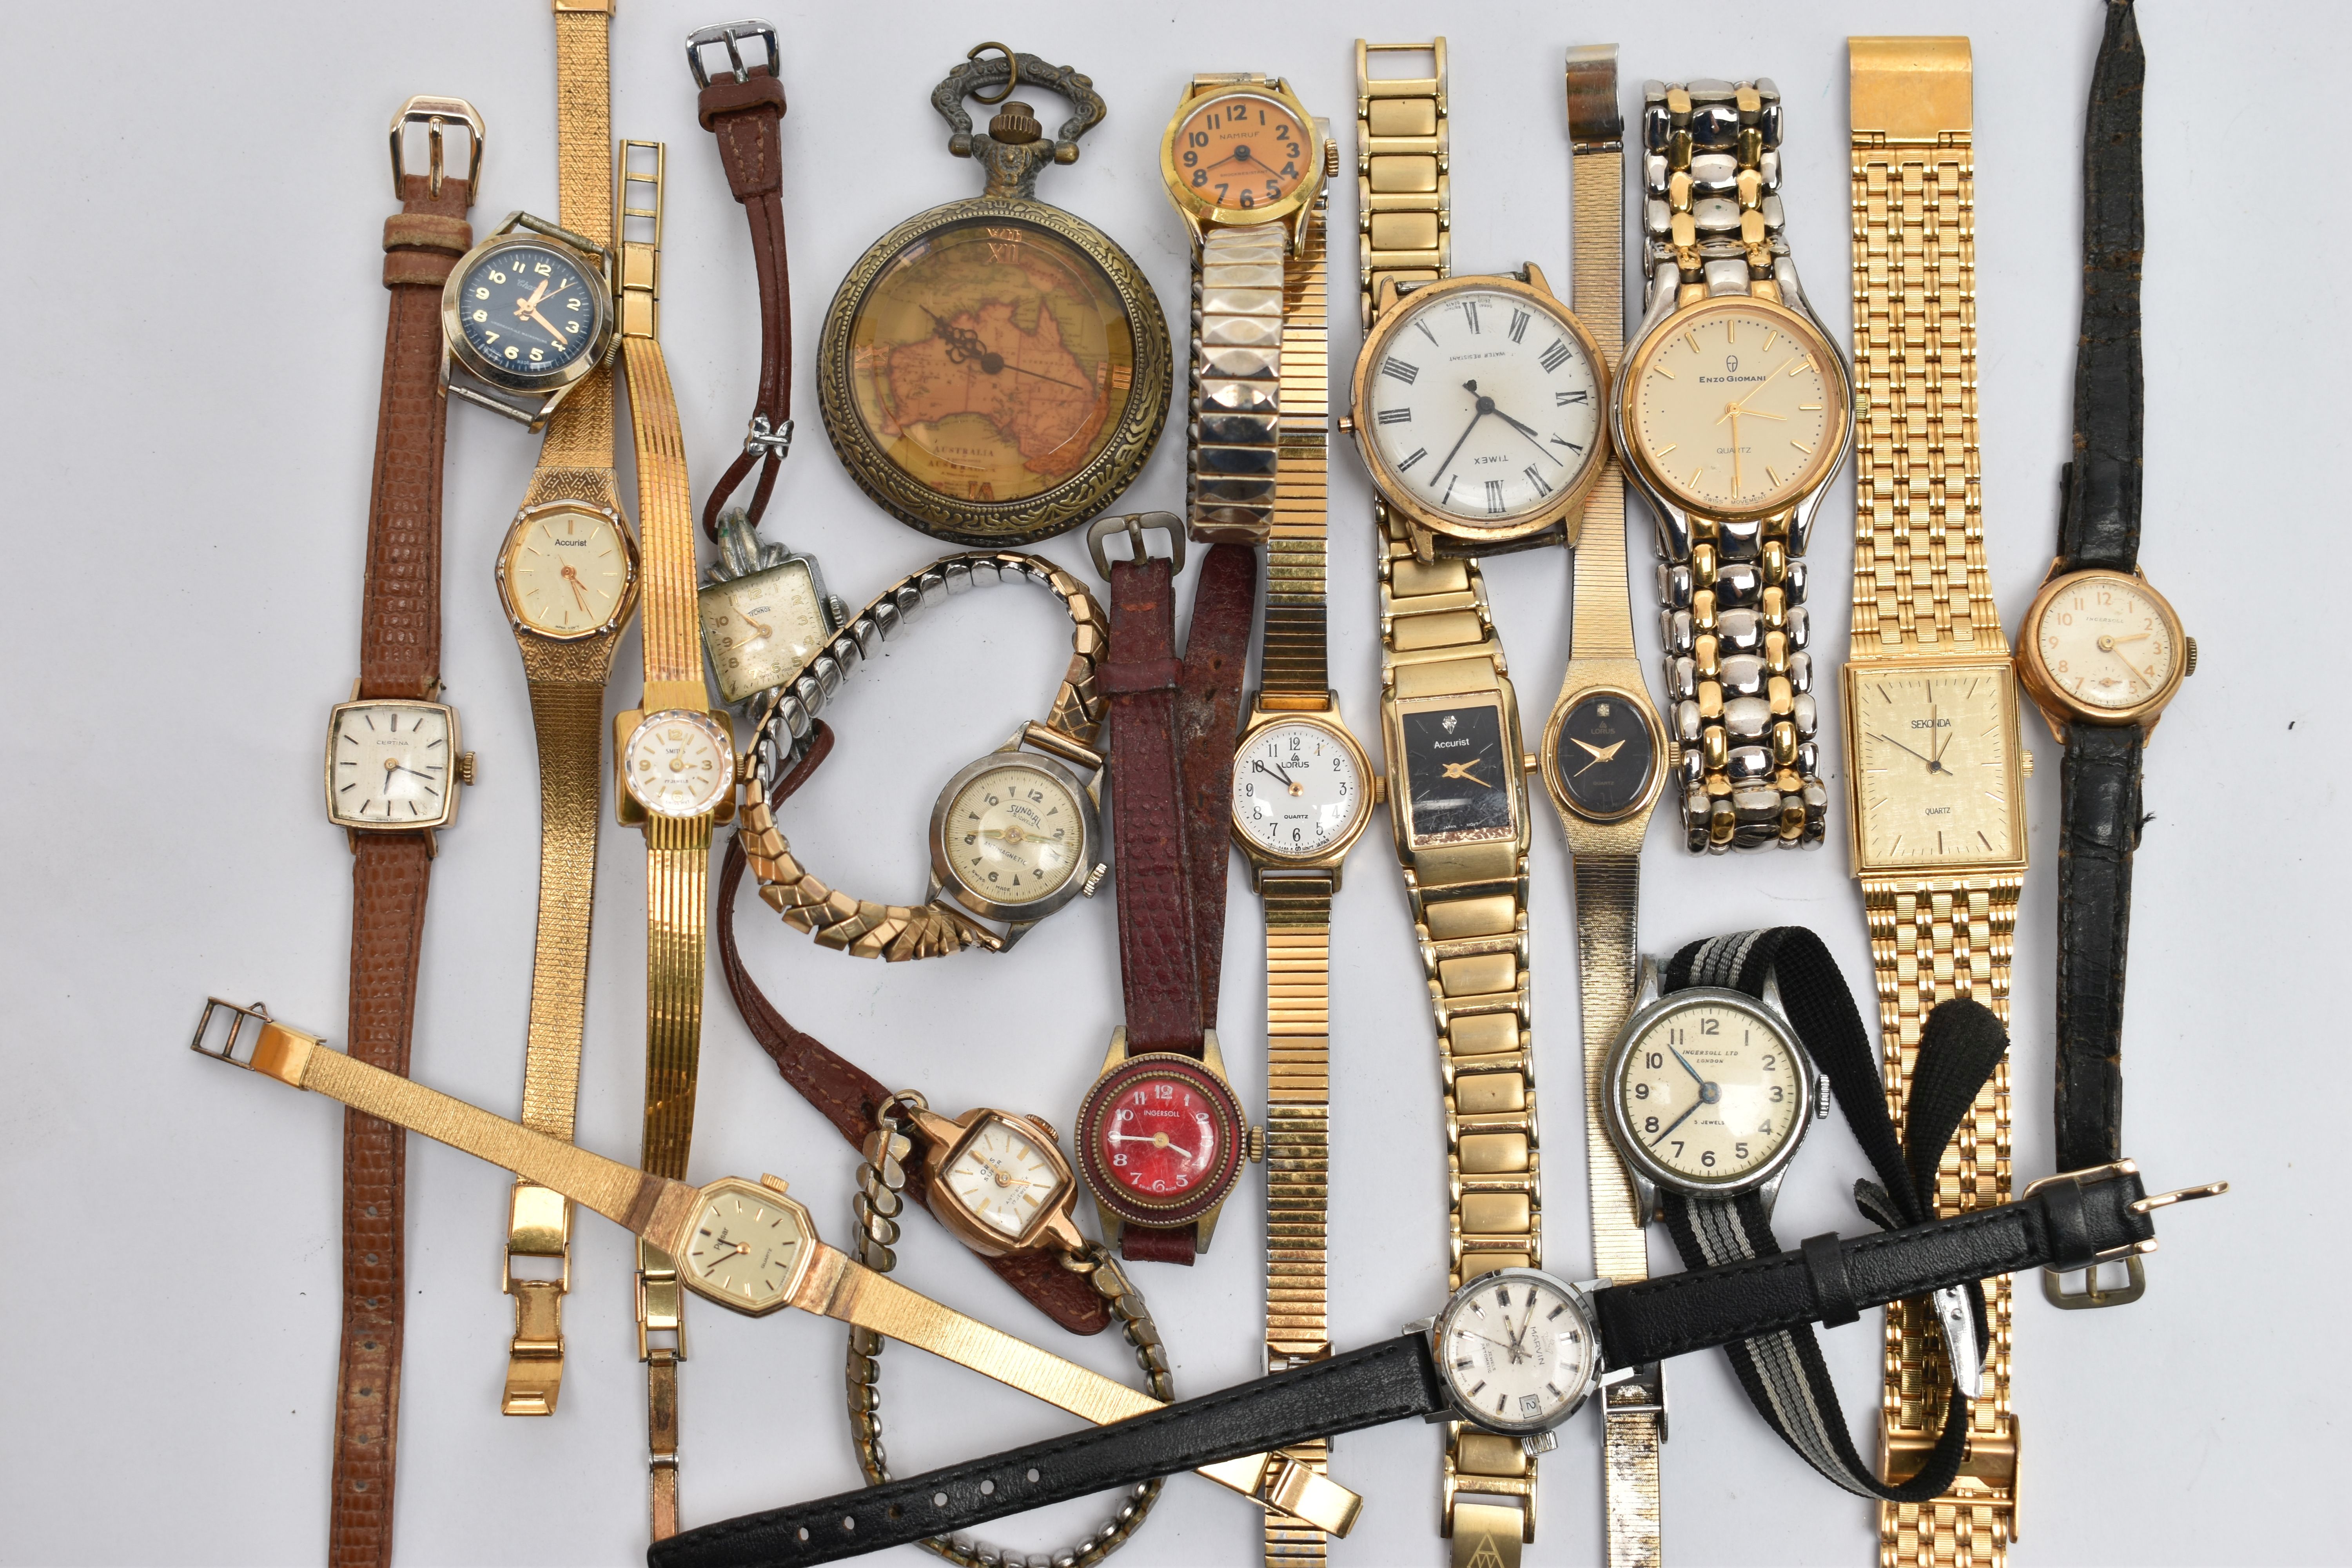 A SMALL BOX OF WRISTWATCHES, to include a few early and mid 20th century examples, also including